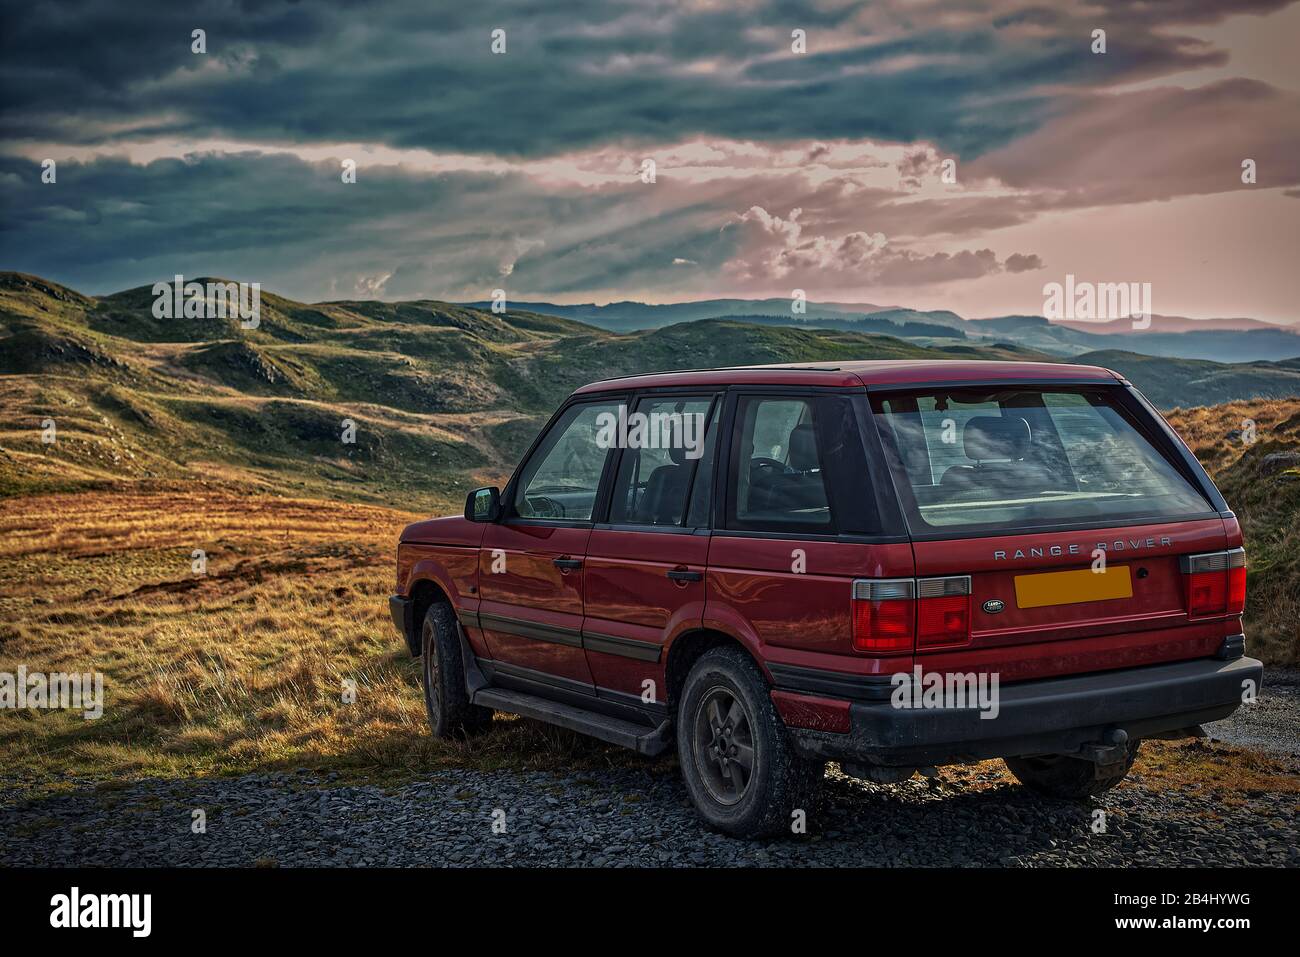 Range Rover P38 Off Road in Wales Stock Photo